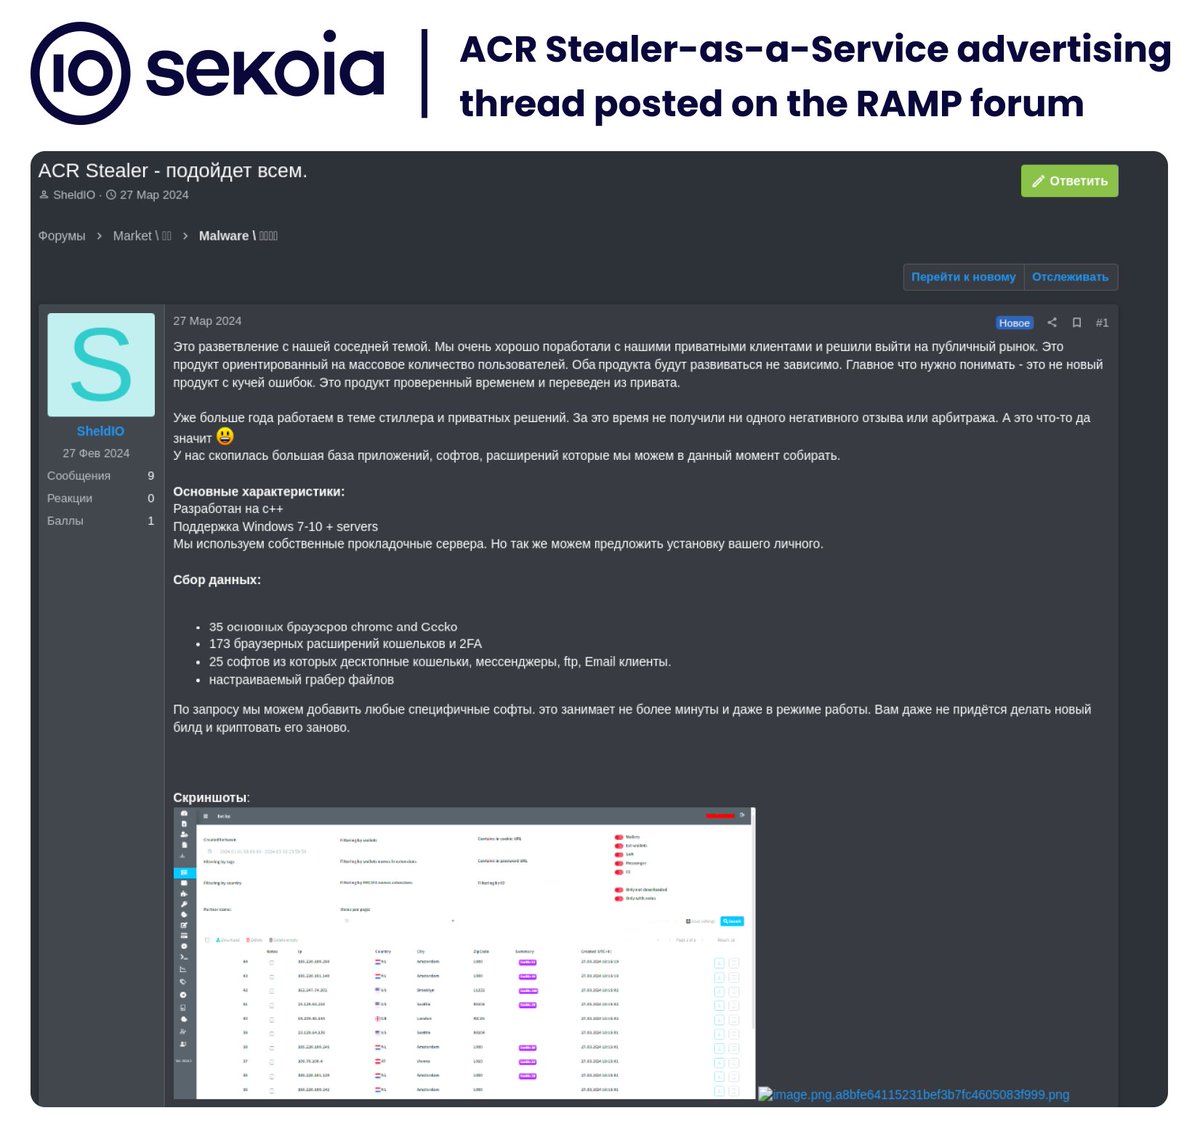 🚨 @sekoia_io analysts investigated the (not so) new infostealer, named #ACR Stealer, advertised on Russian-speaking underground forums by SheldIO.

Our technical analysis revealed that ACR Stealer is a new, updated variant of the older #GrMsk Stealer.

⬇️